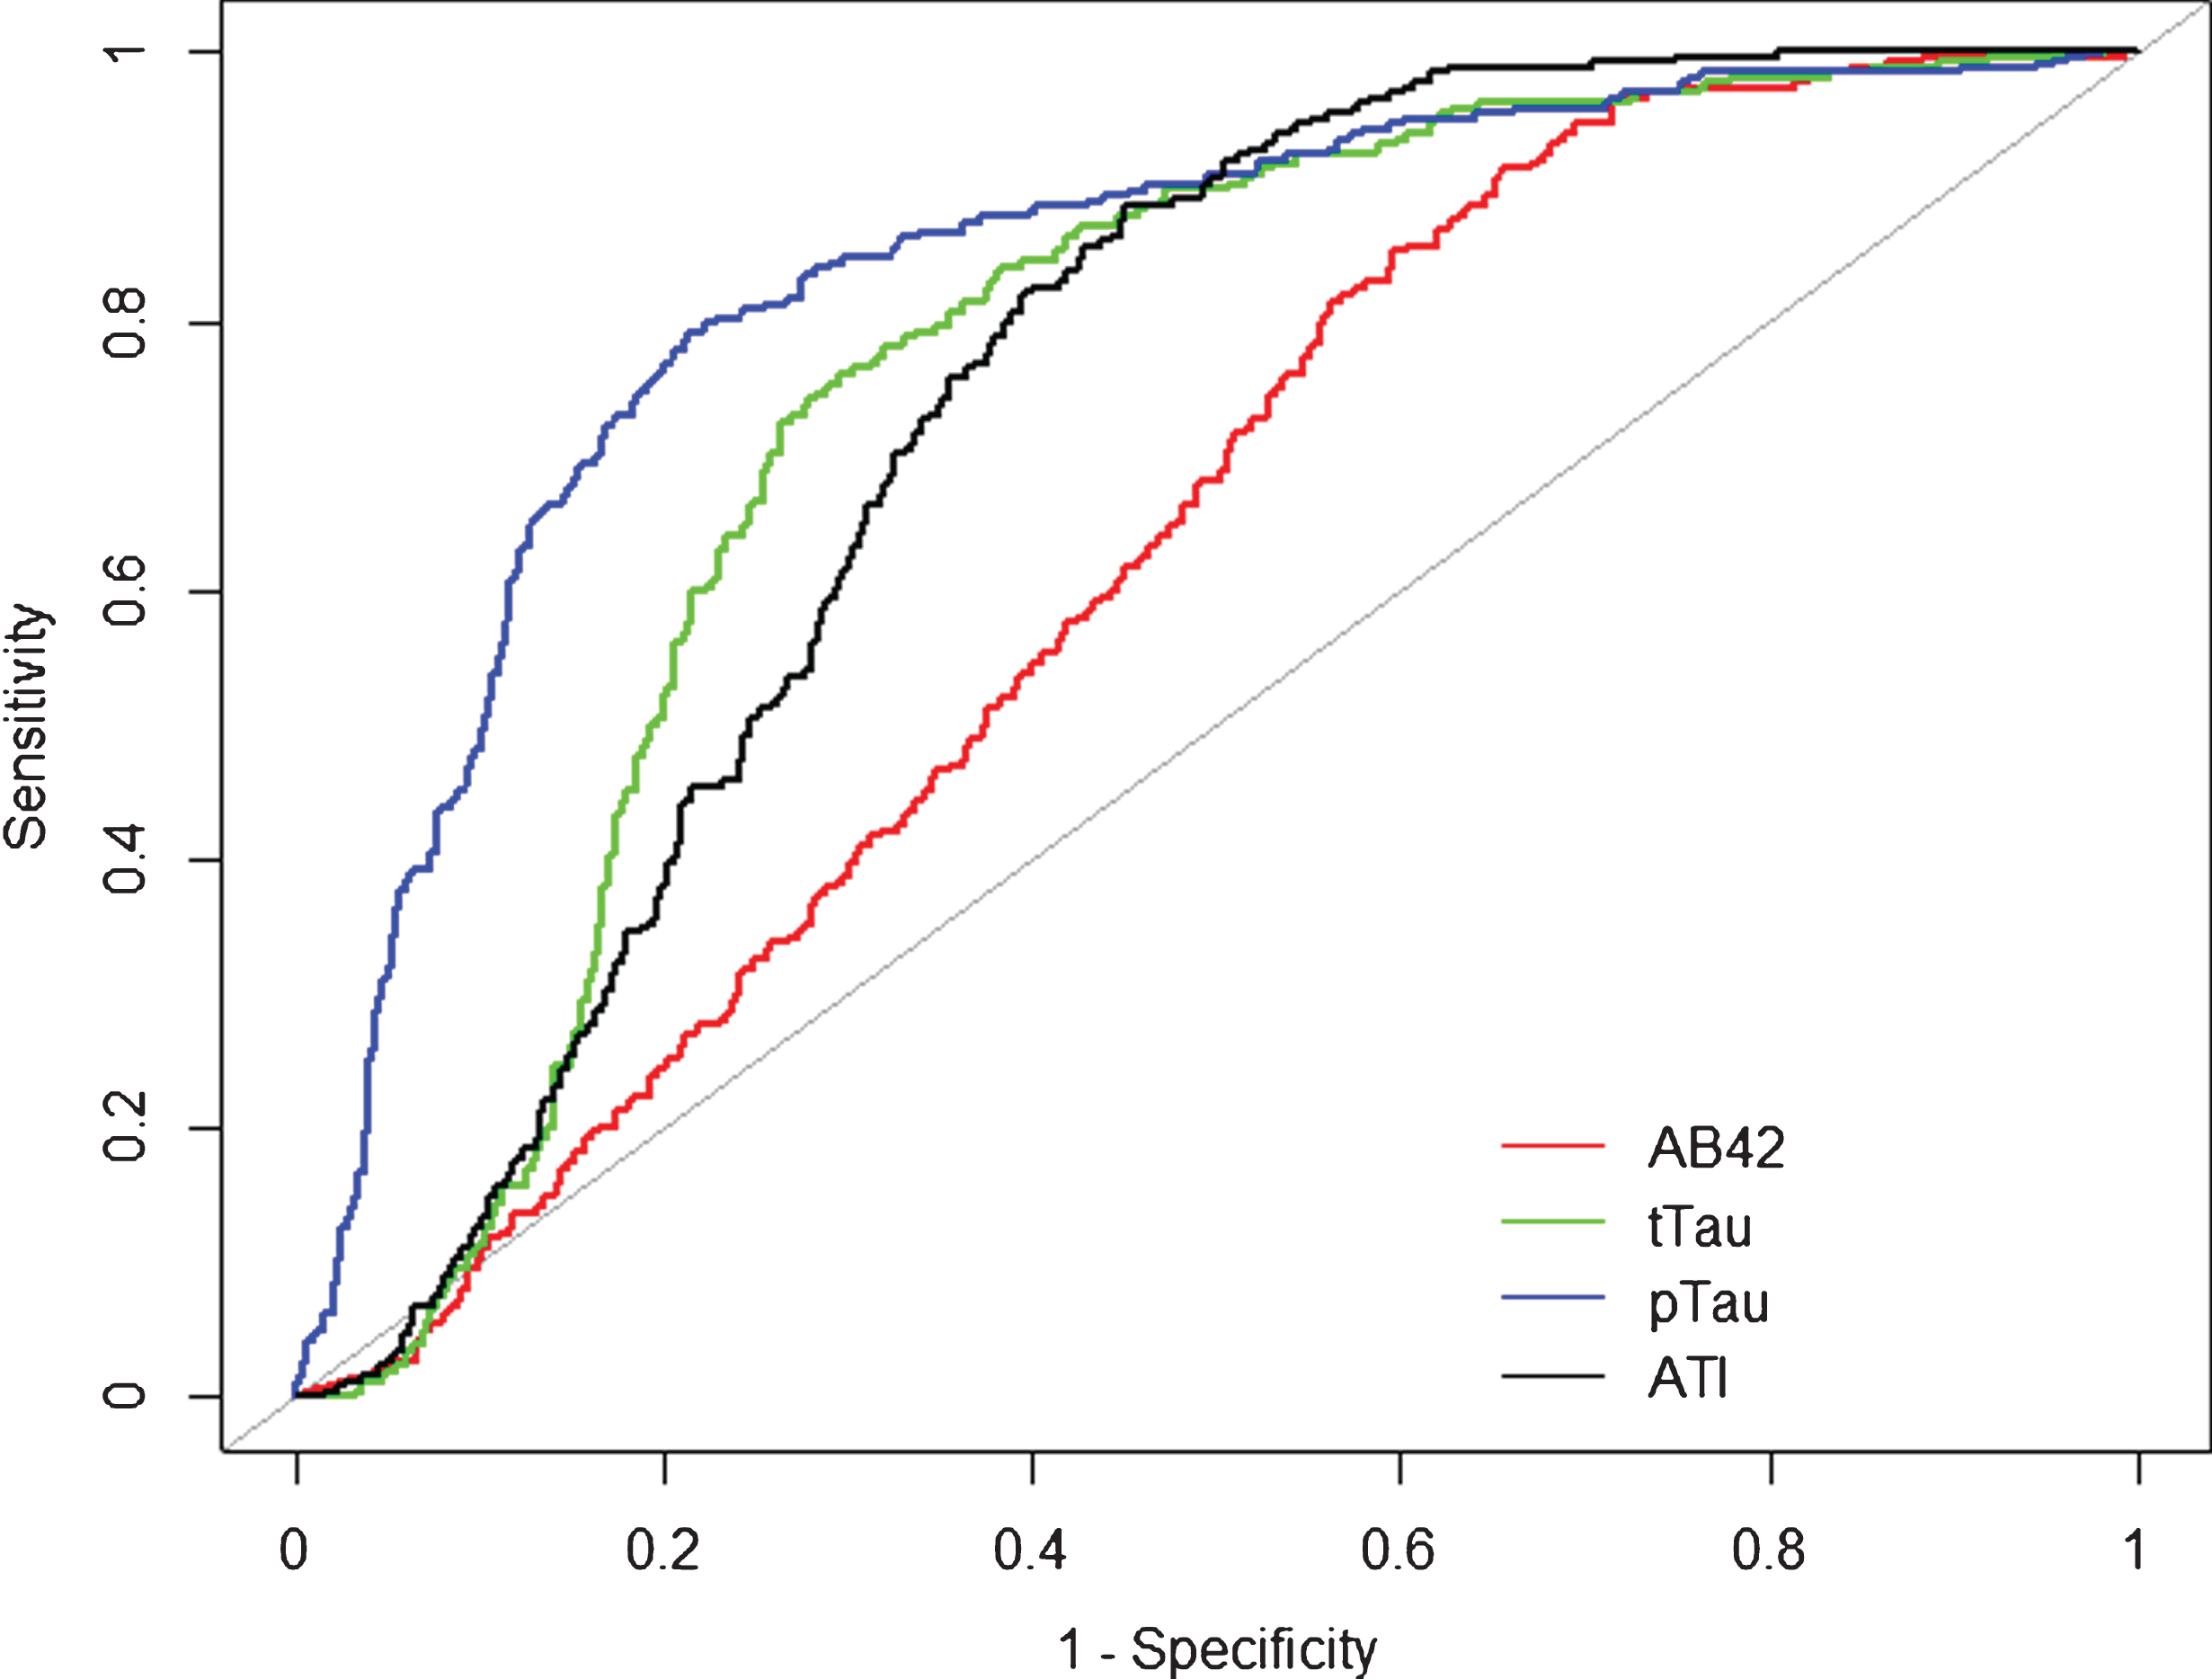 Receiver operation curve (ROC). Alzheimer’s disease compared to overall population of the cohort. Alzheimer’s disease (n = 264) was compared to the overall population of the cohort (n = 752). Aβ42 (red), tTau (green), pTau (blue), and ATI (black) CSF biomarker ROC curves are reported here. AUC analyses fully reported in the text.